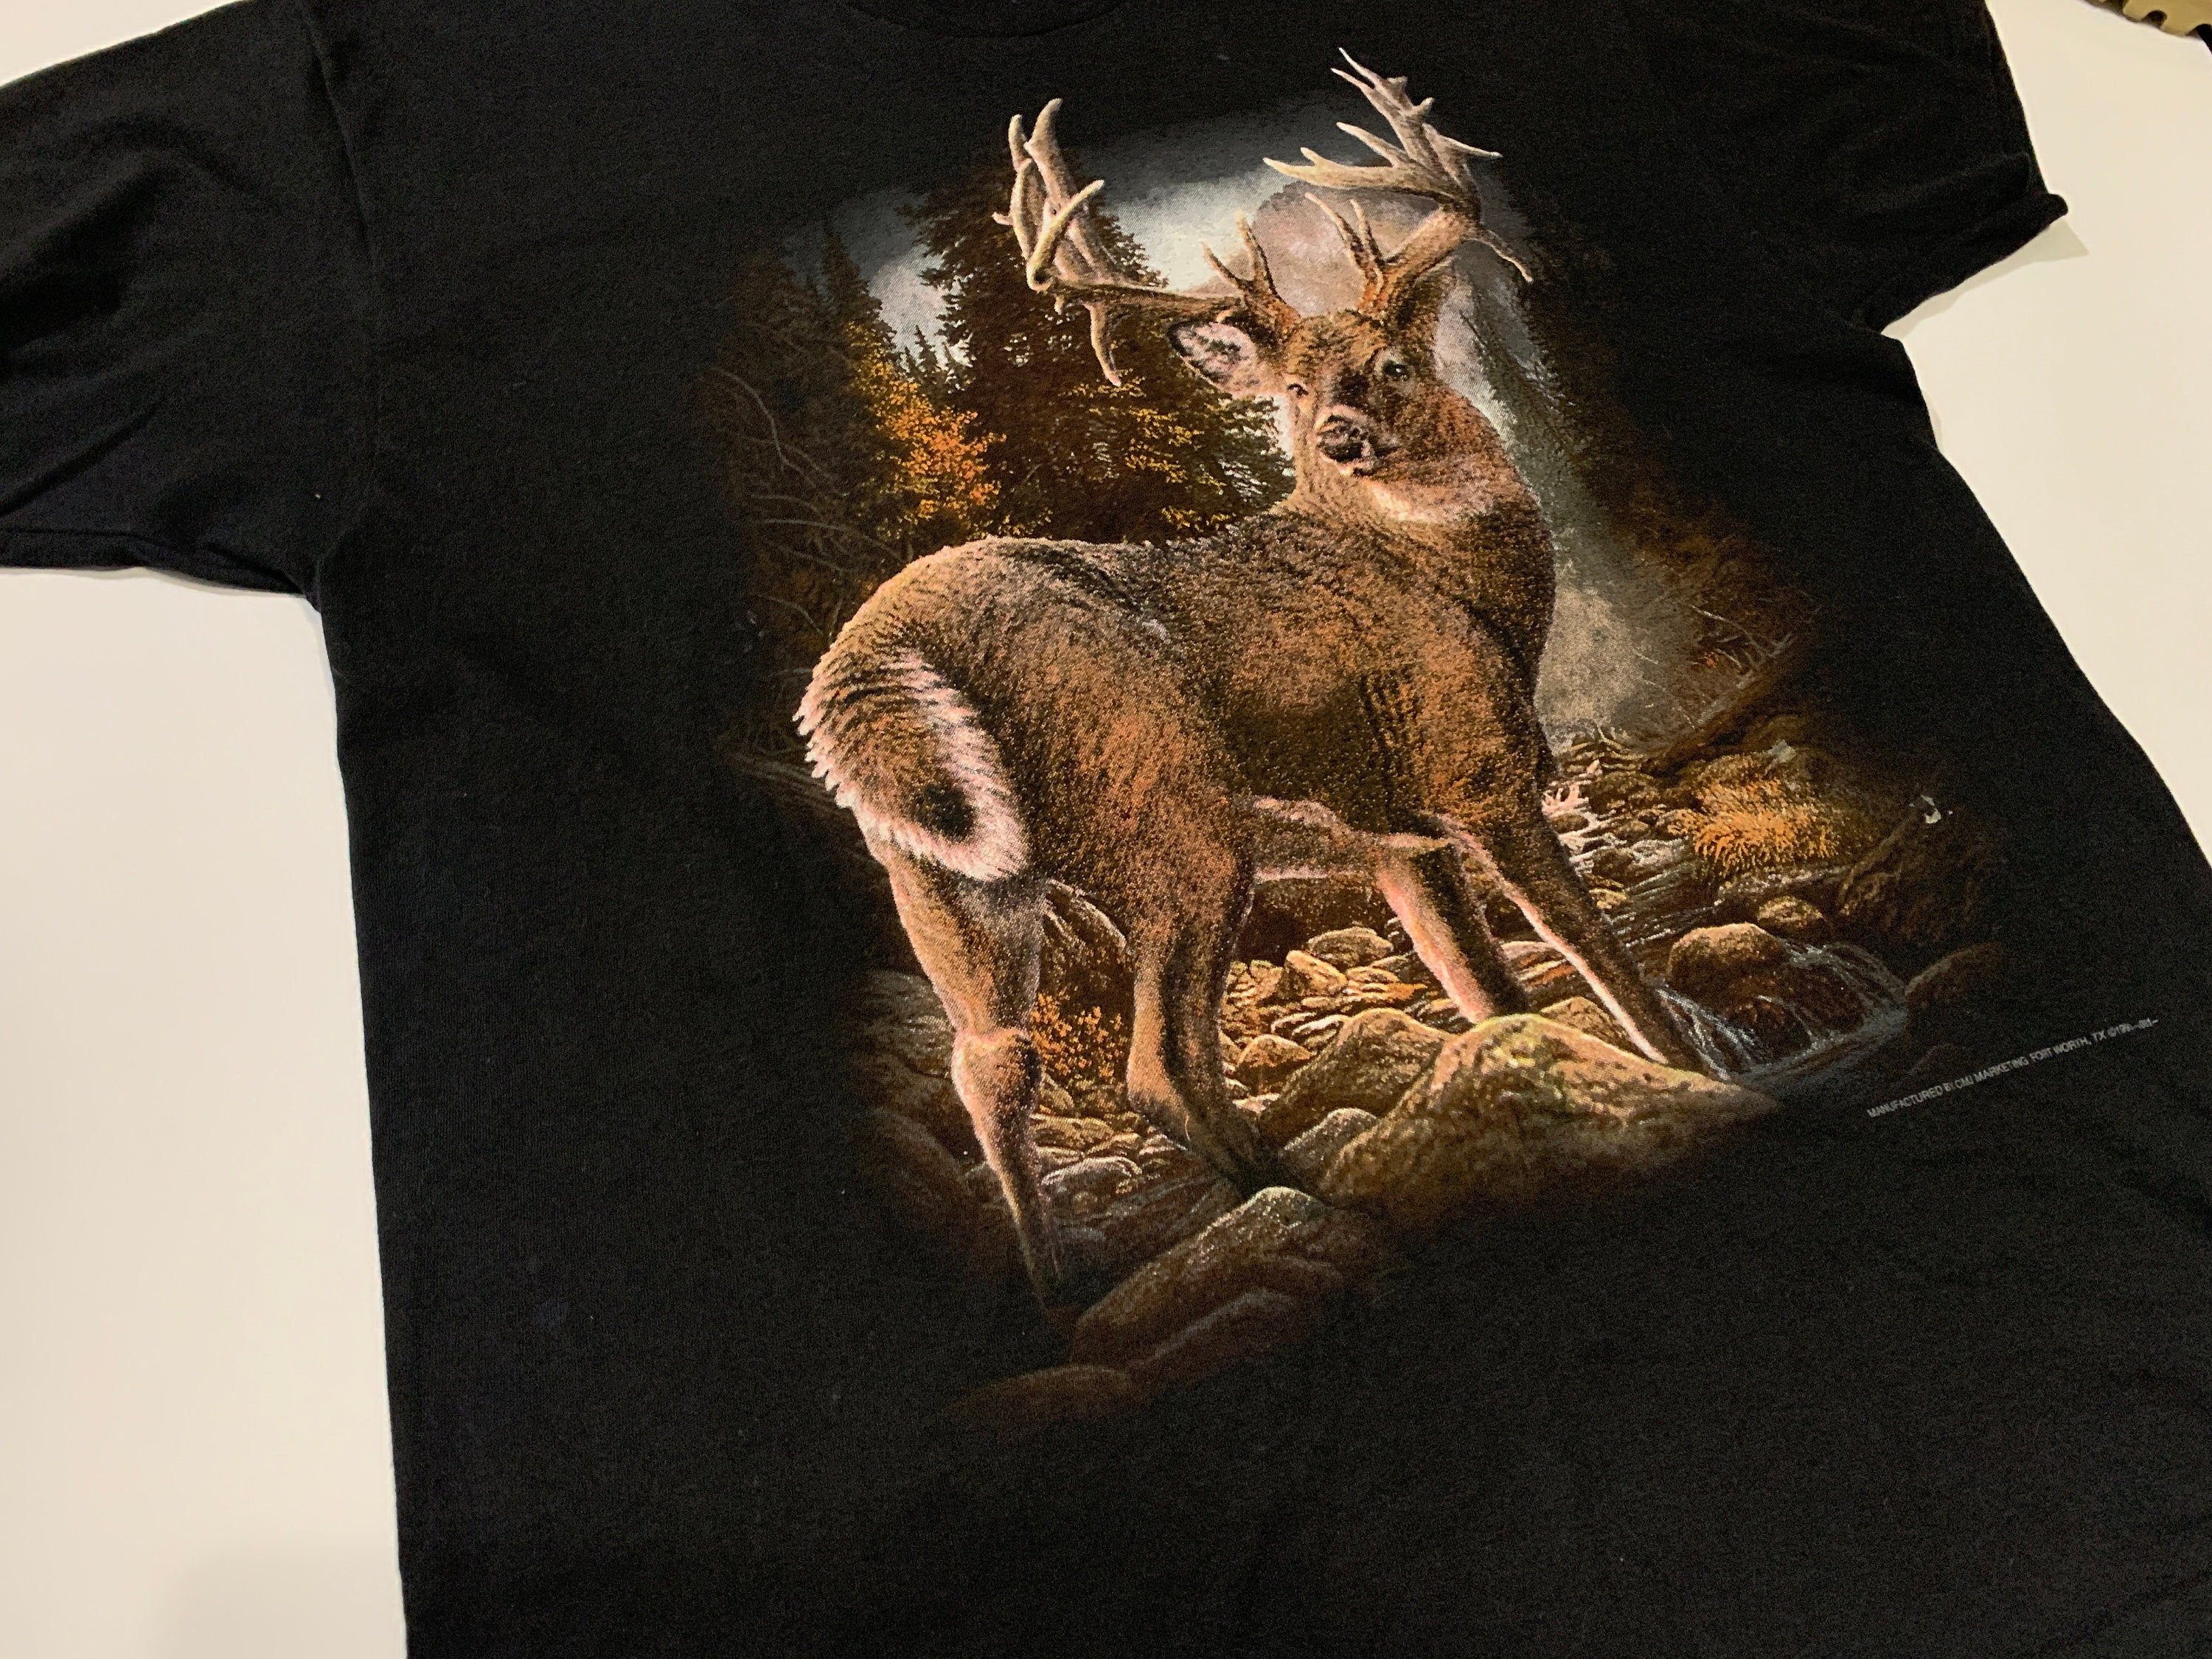 Made Black XL Tee Marketing 3D Graphic Spell Vintage Stitch T-shirt - Emblem Big Nature in Etsy Animal USA Deer Single 1993 Rare Out CMJ Print